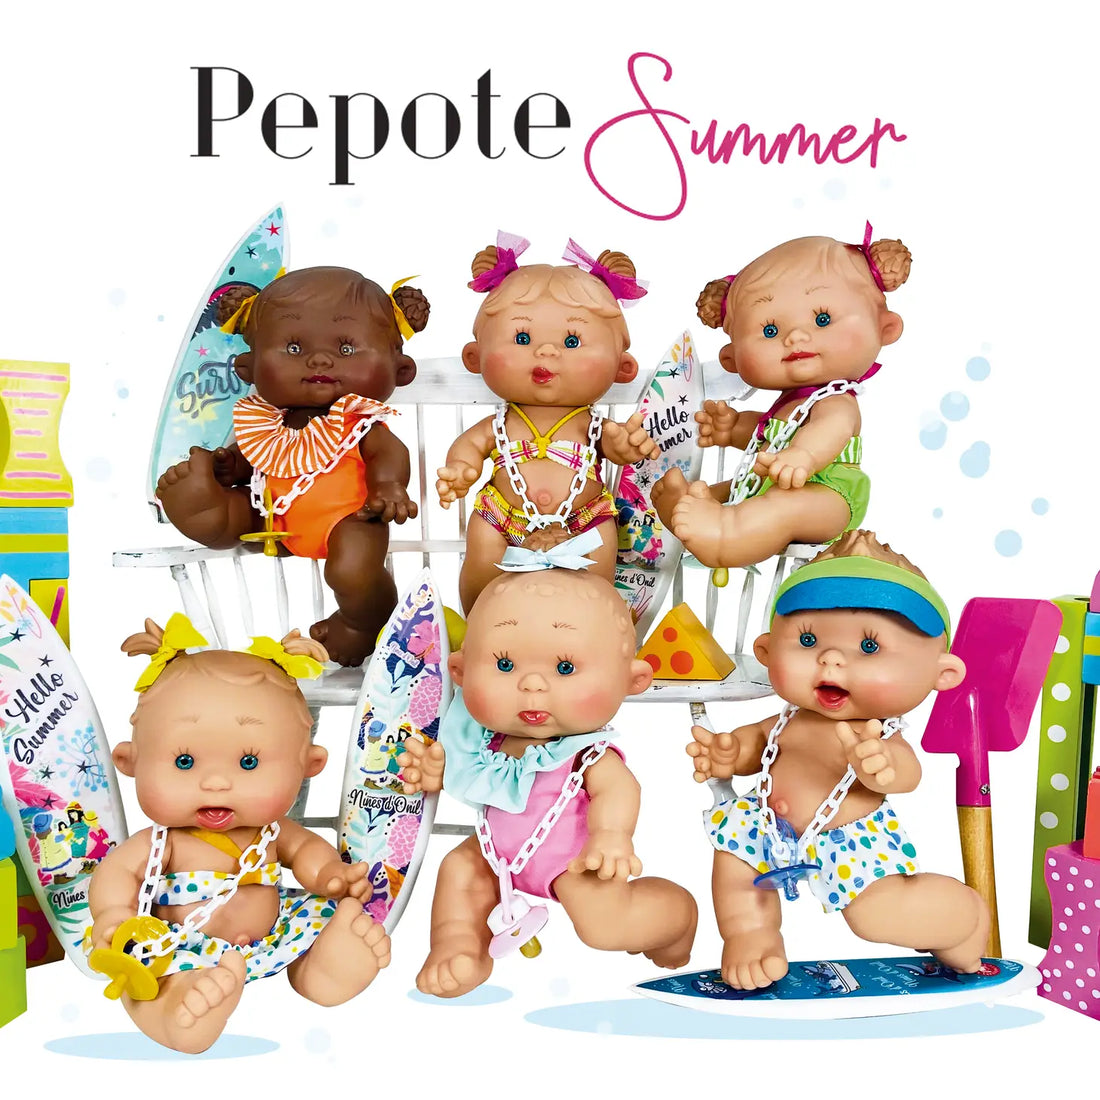 Baby Doll Pepote Summer by Nines D&